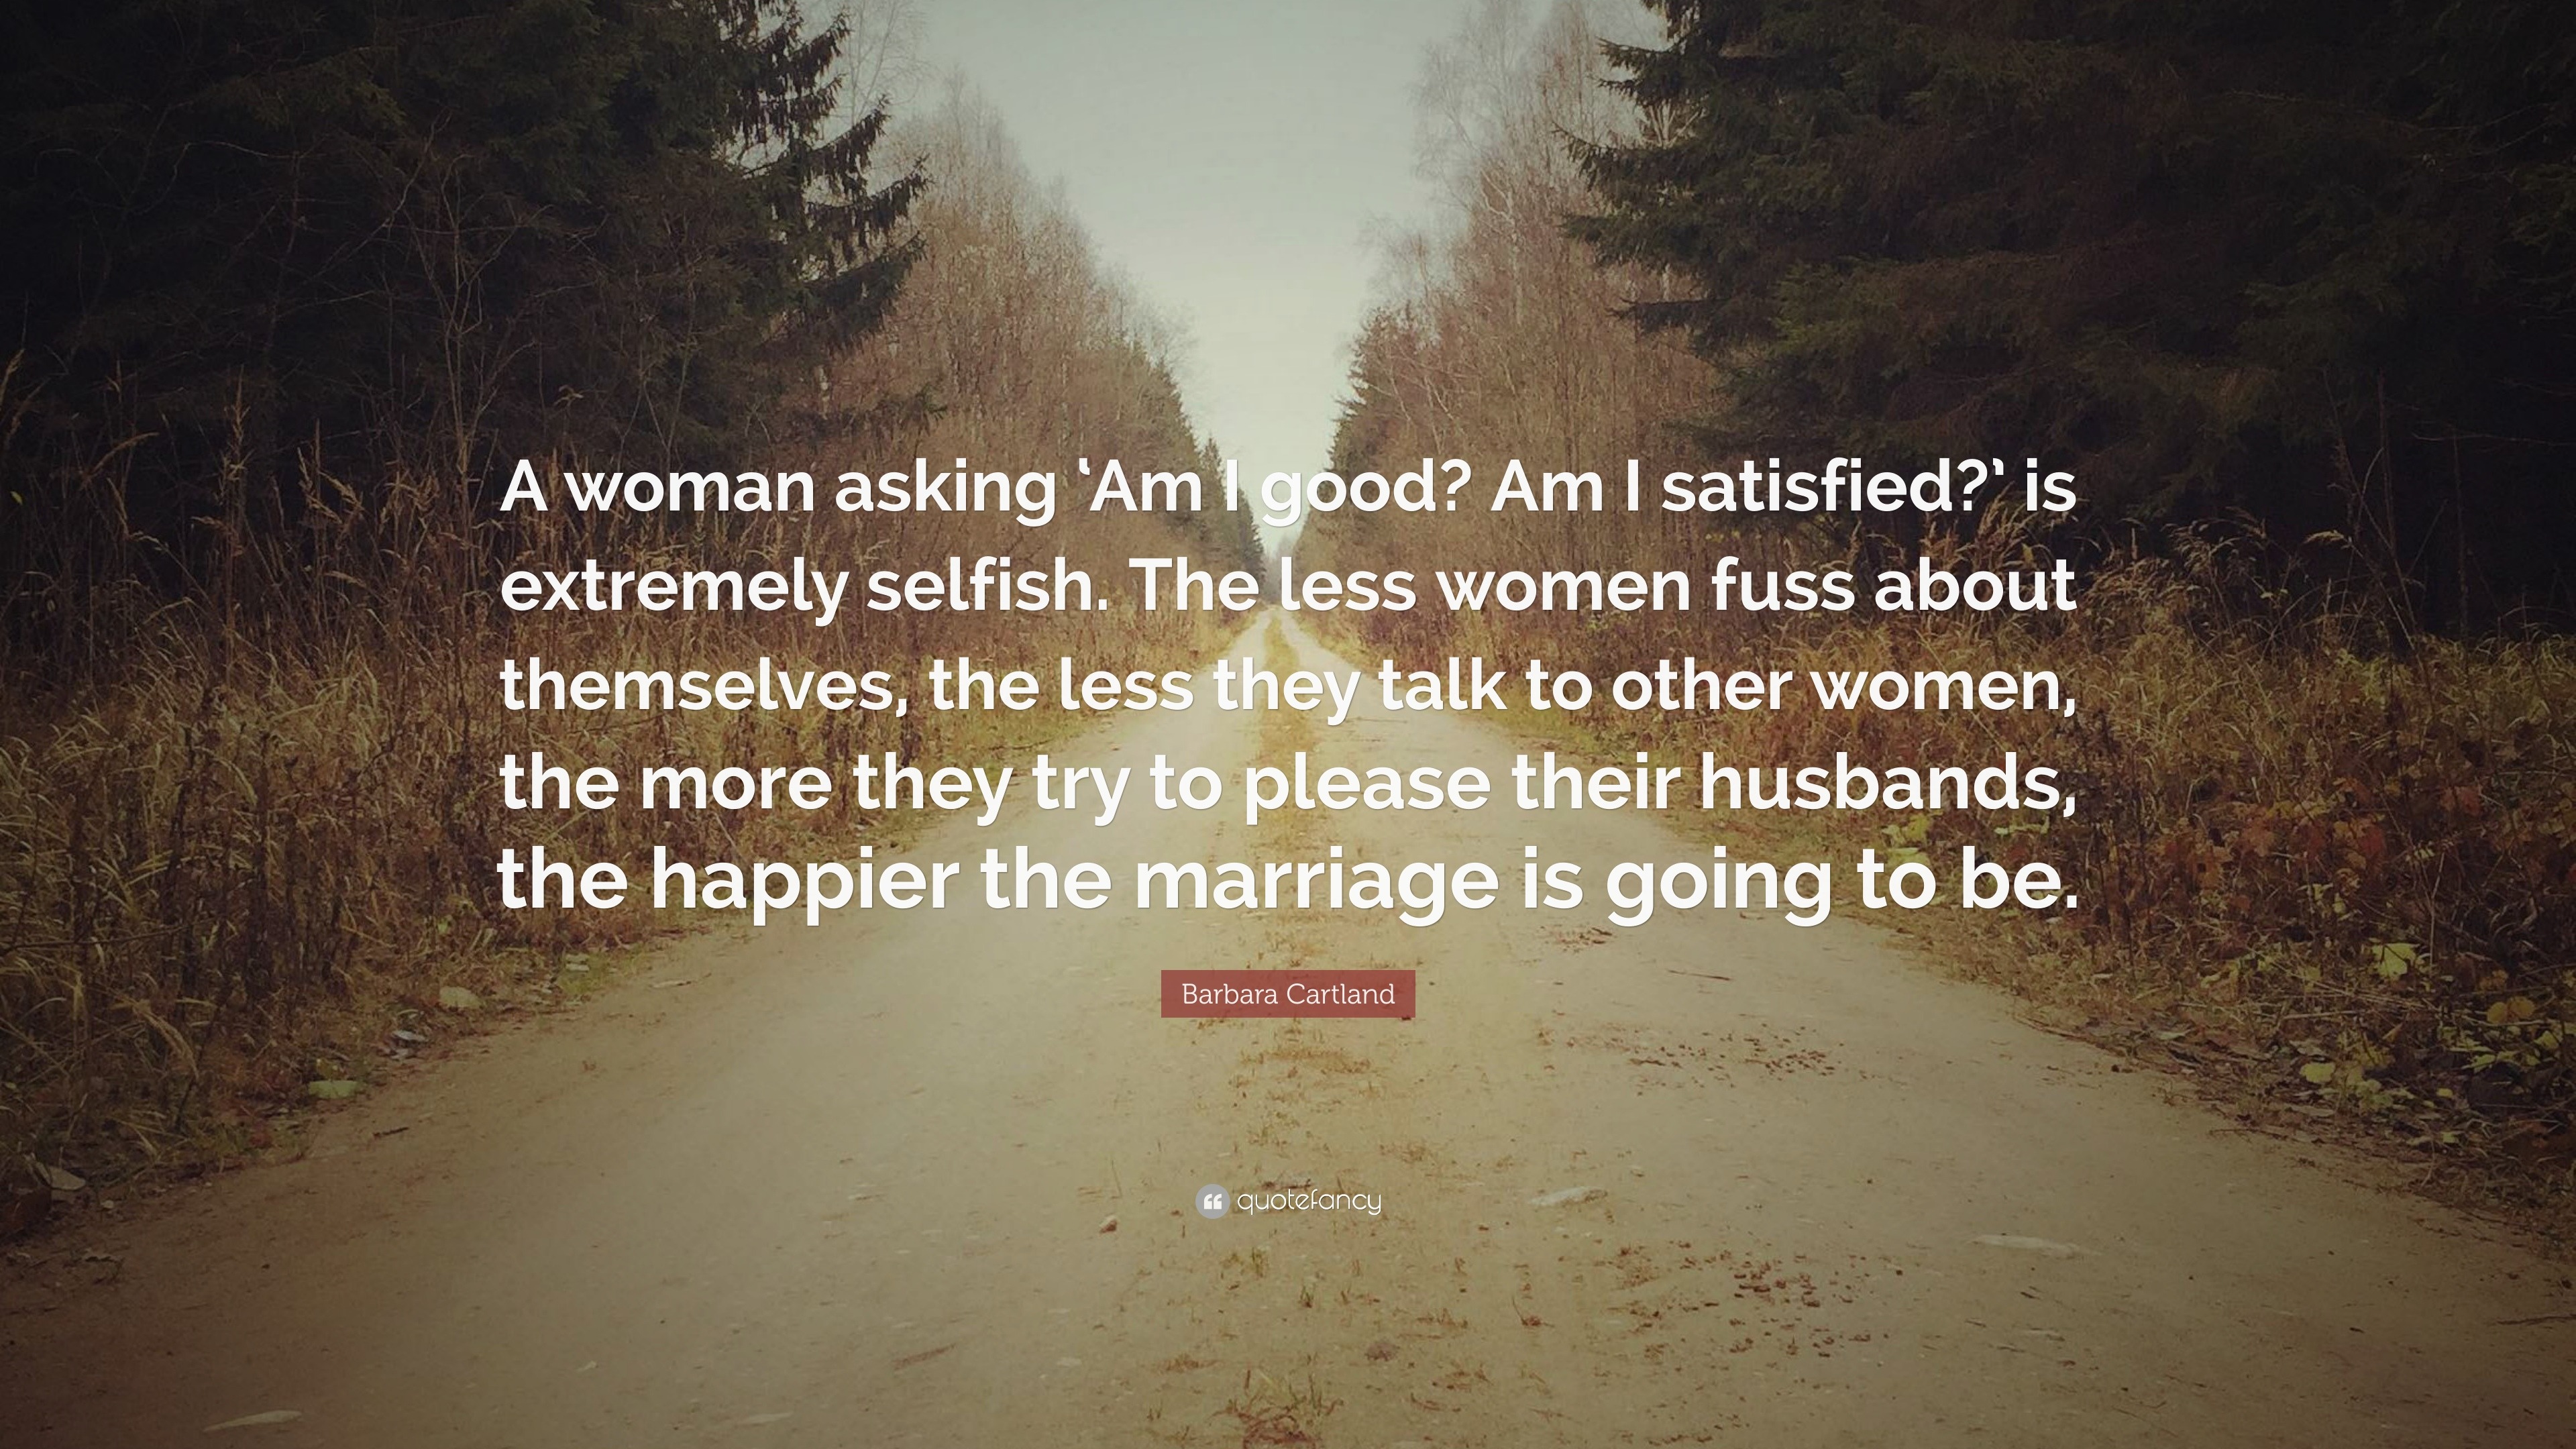 Barbara Cartland Quote: “A woman asking ‘Am I good? Am I satisfied?’ is ...